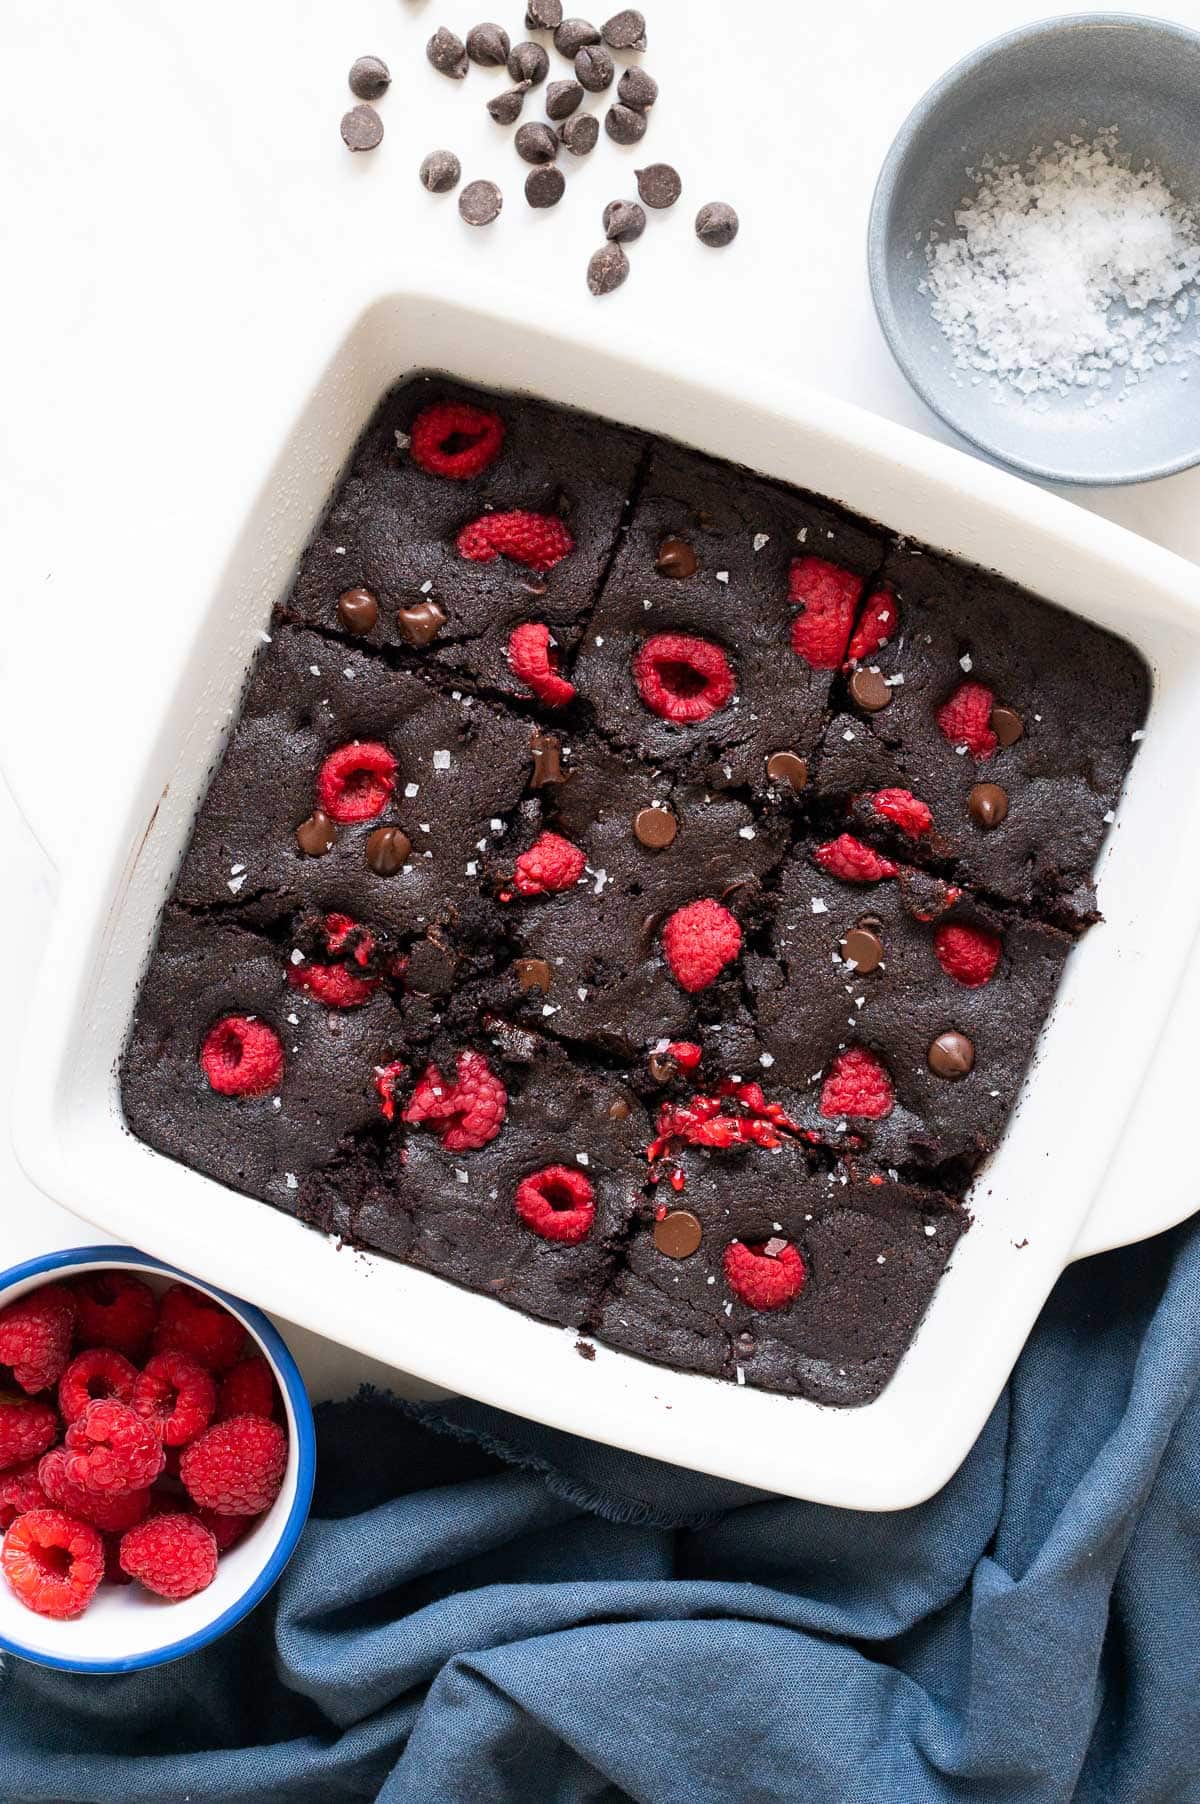 Sliced oat flour brownies with chocolate chips and raspberries in white baking dish.